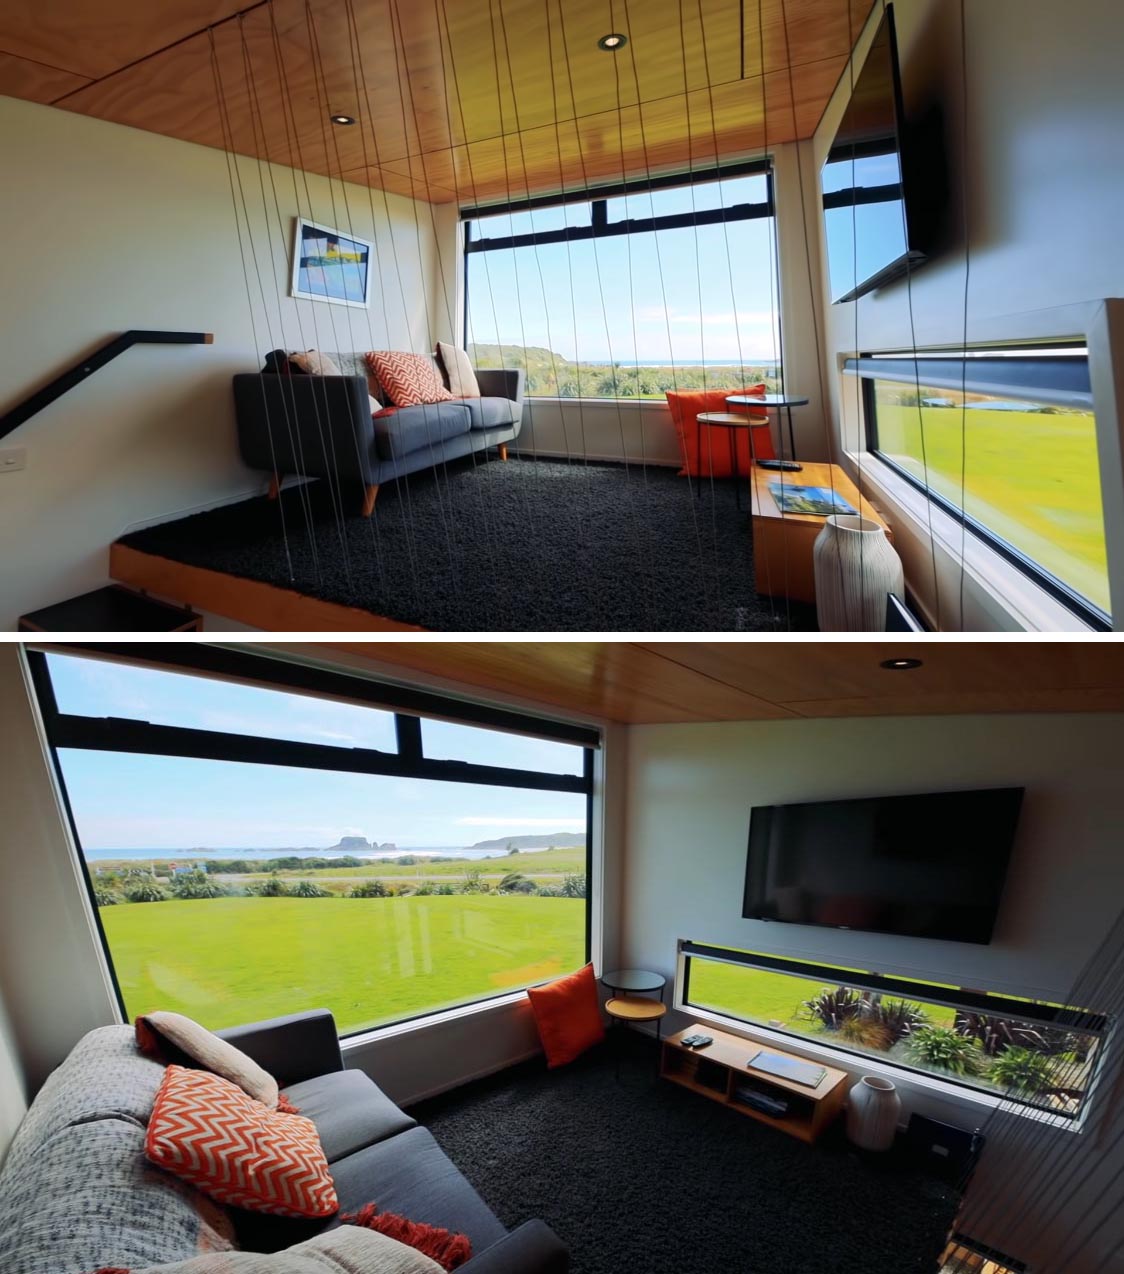 The lofted living room of this modern tiny house has been positioned to take advantage of the water views that can be seen through the large picture window.